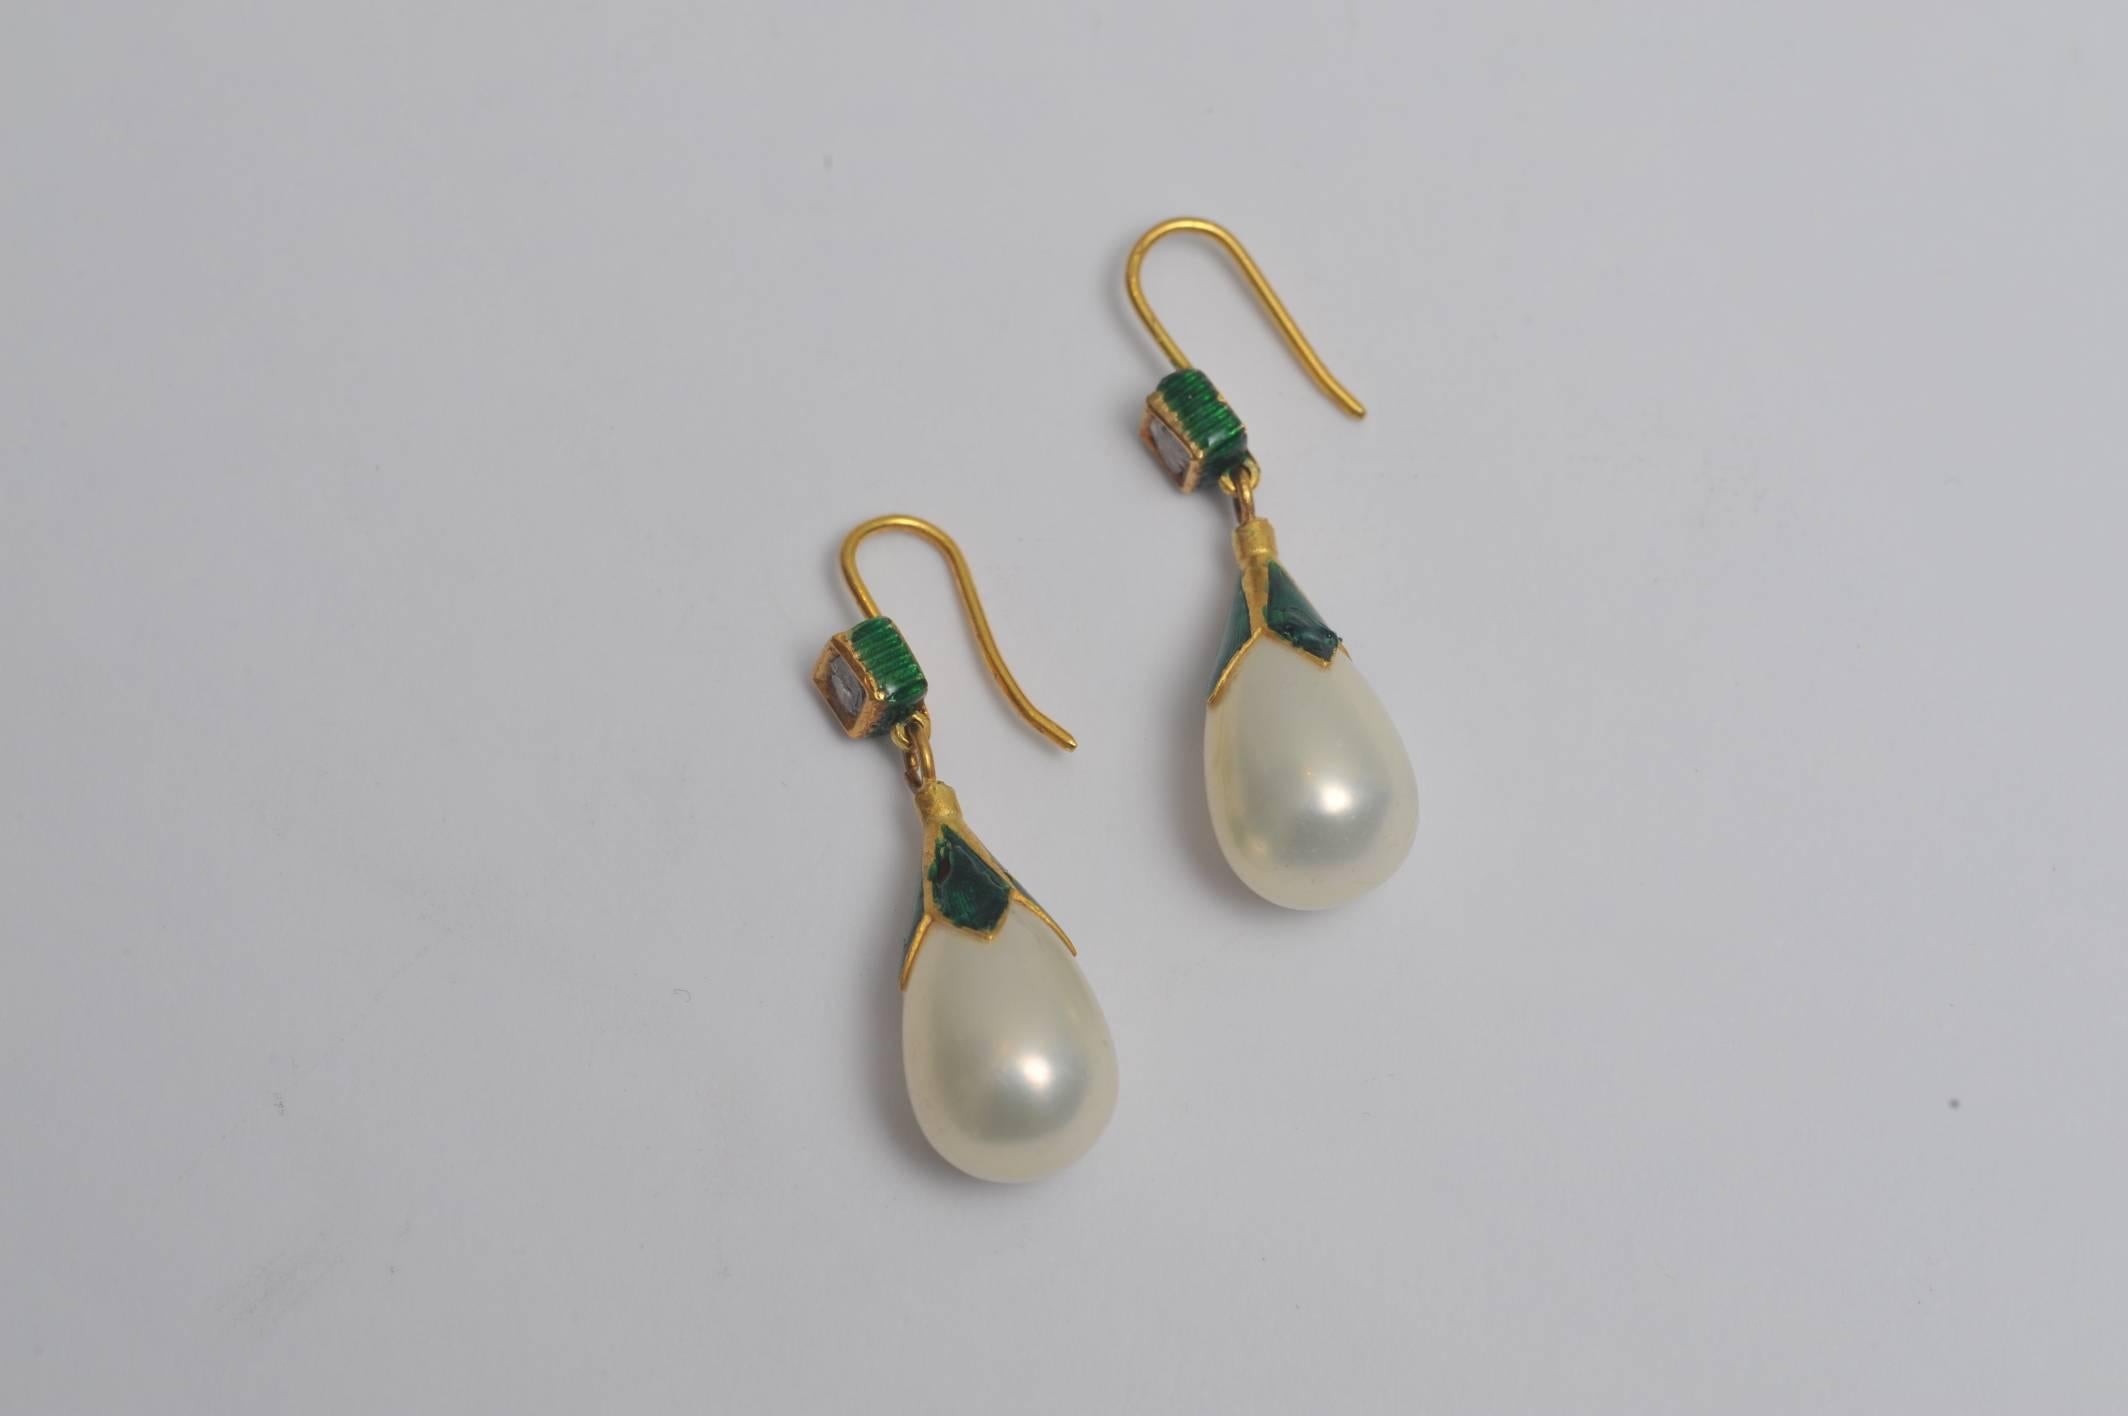 Pear-shaped pearls with 22K gold and square rosecut diamonds; all accented with green enamel.  Very unusual and not your grandmother's pearl earrings.